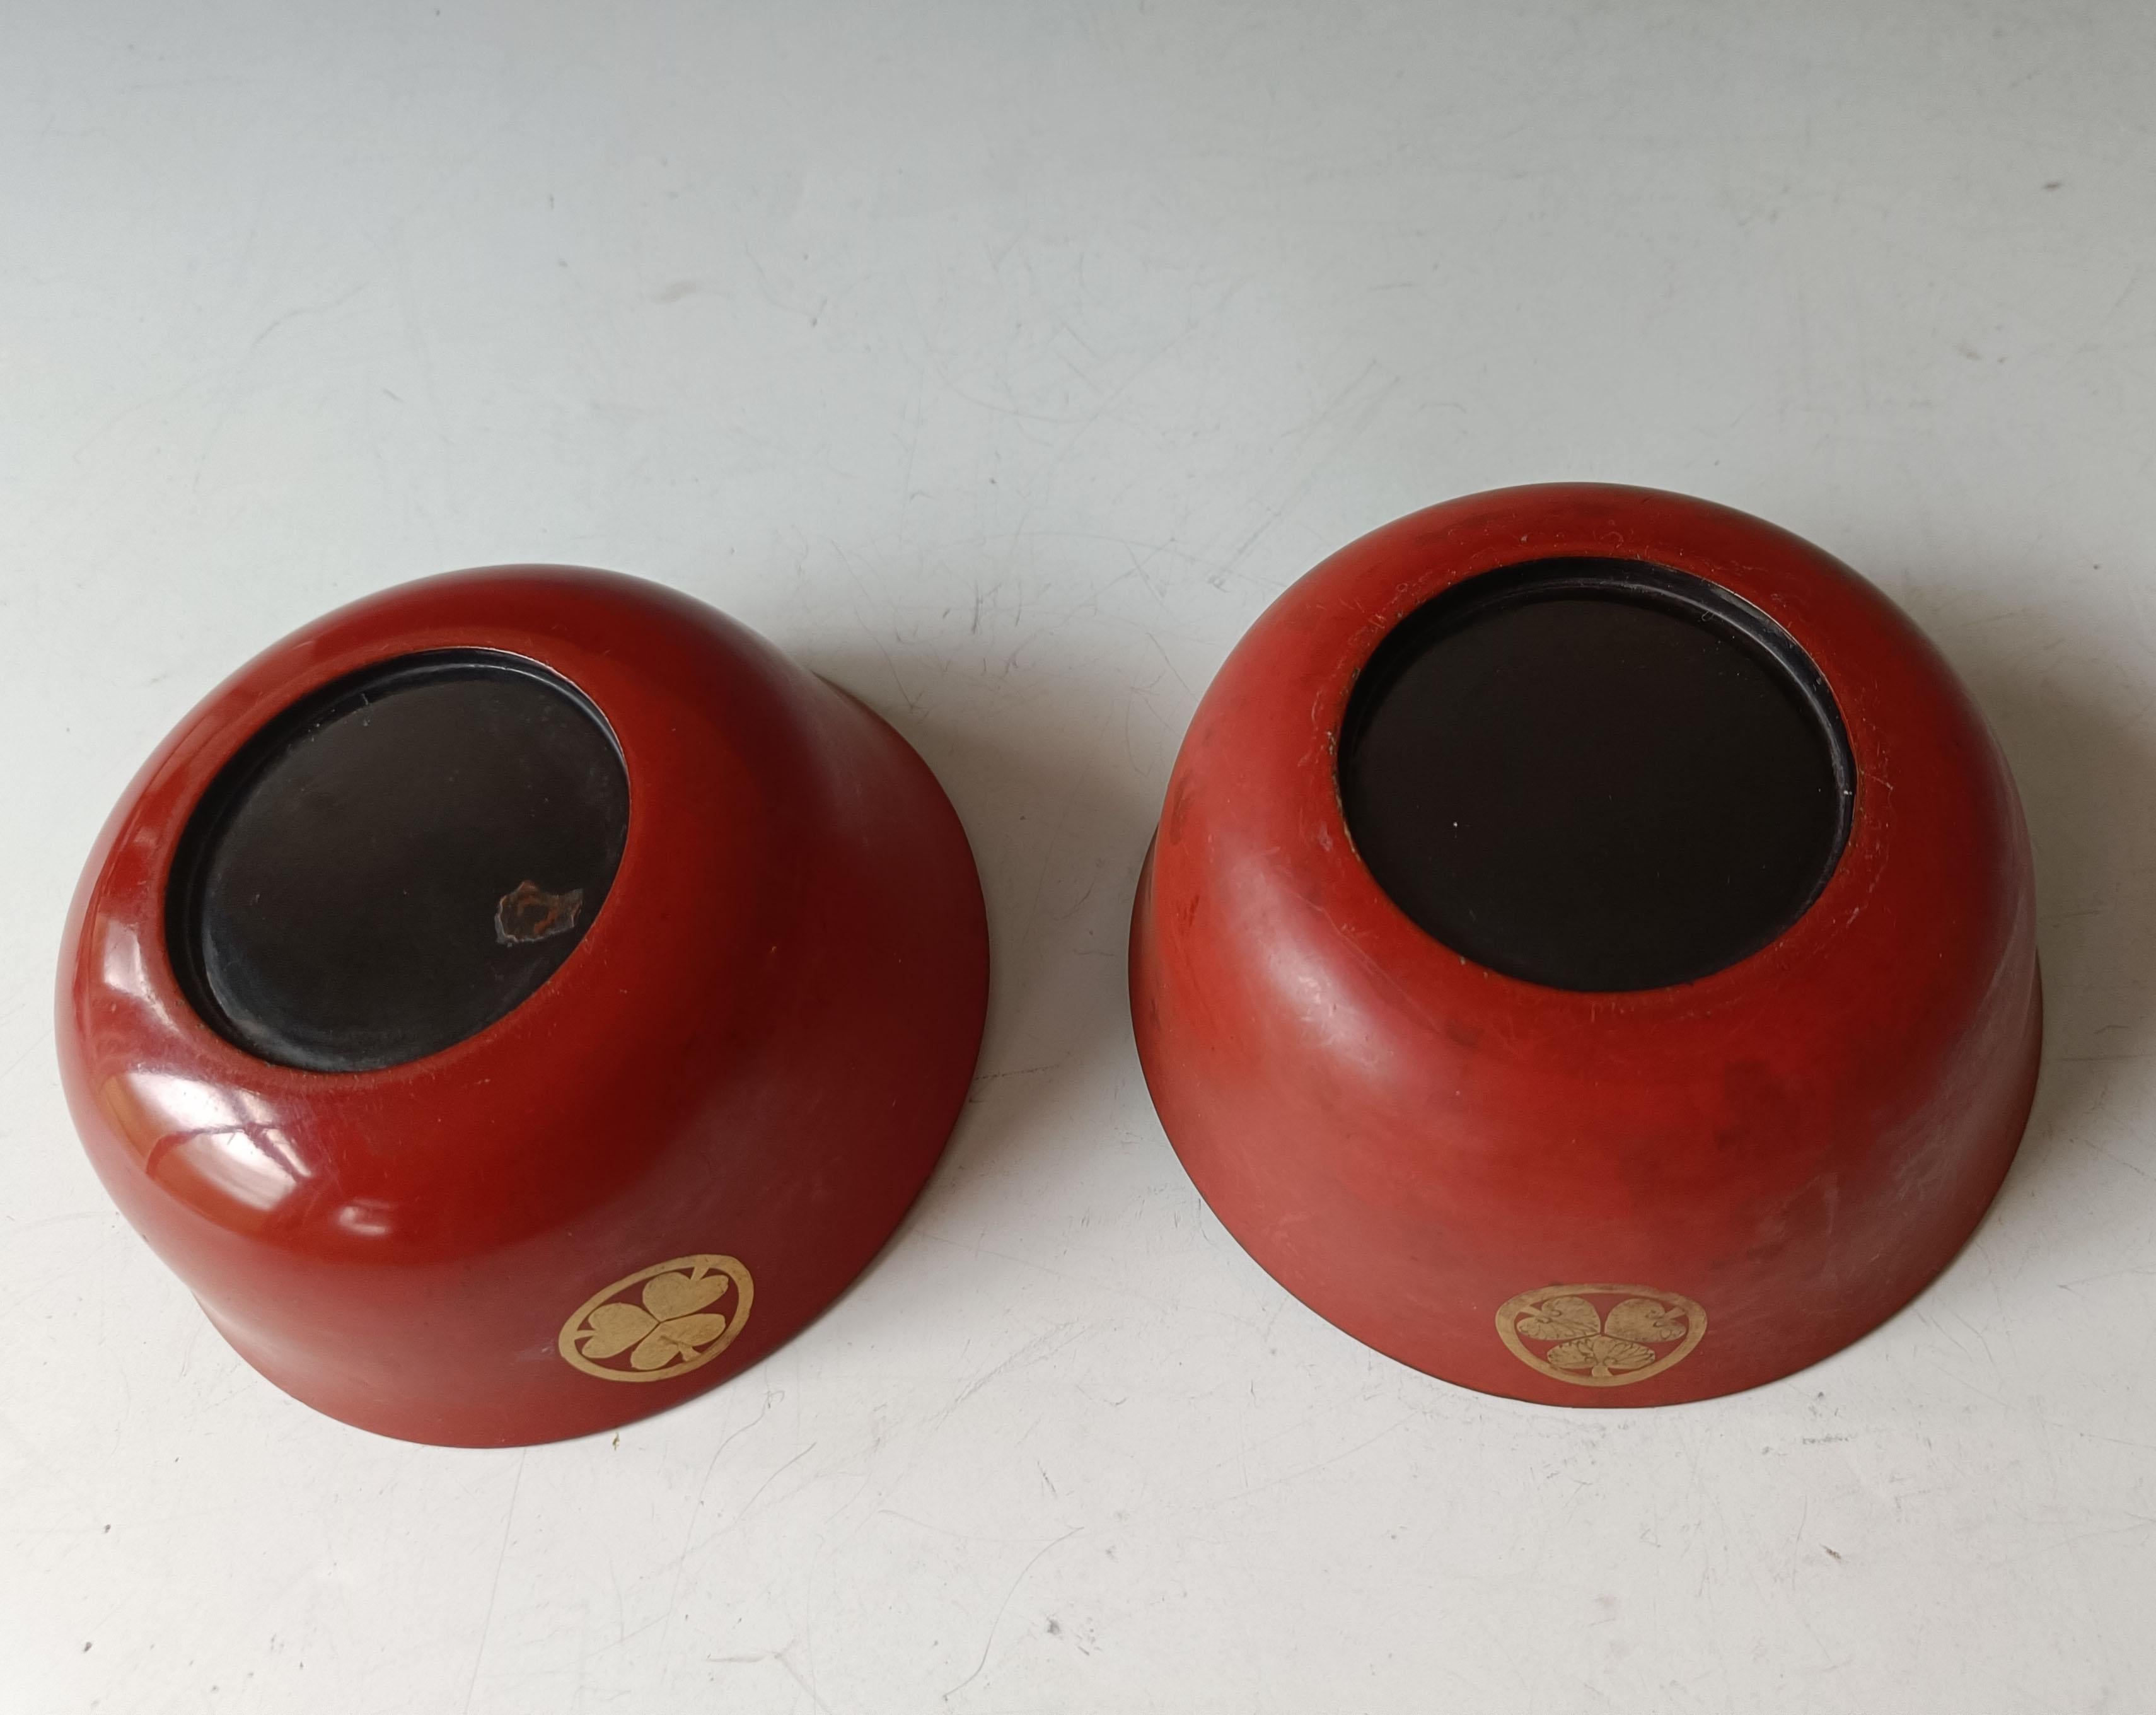 Japanese Lacquered Wood Bowls 19th Century Asian Antiques 中国古董 In Good Condition For Sale In London, GB